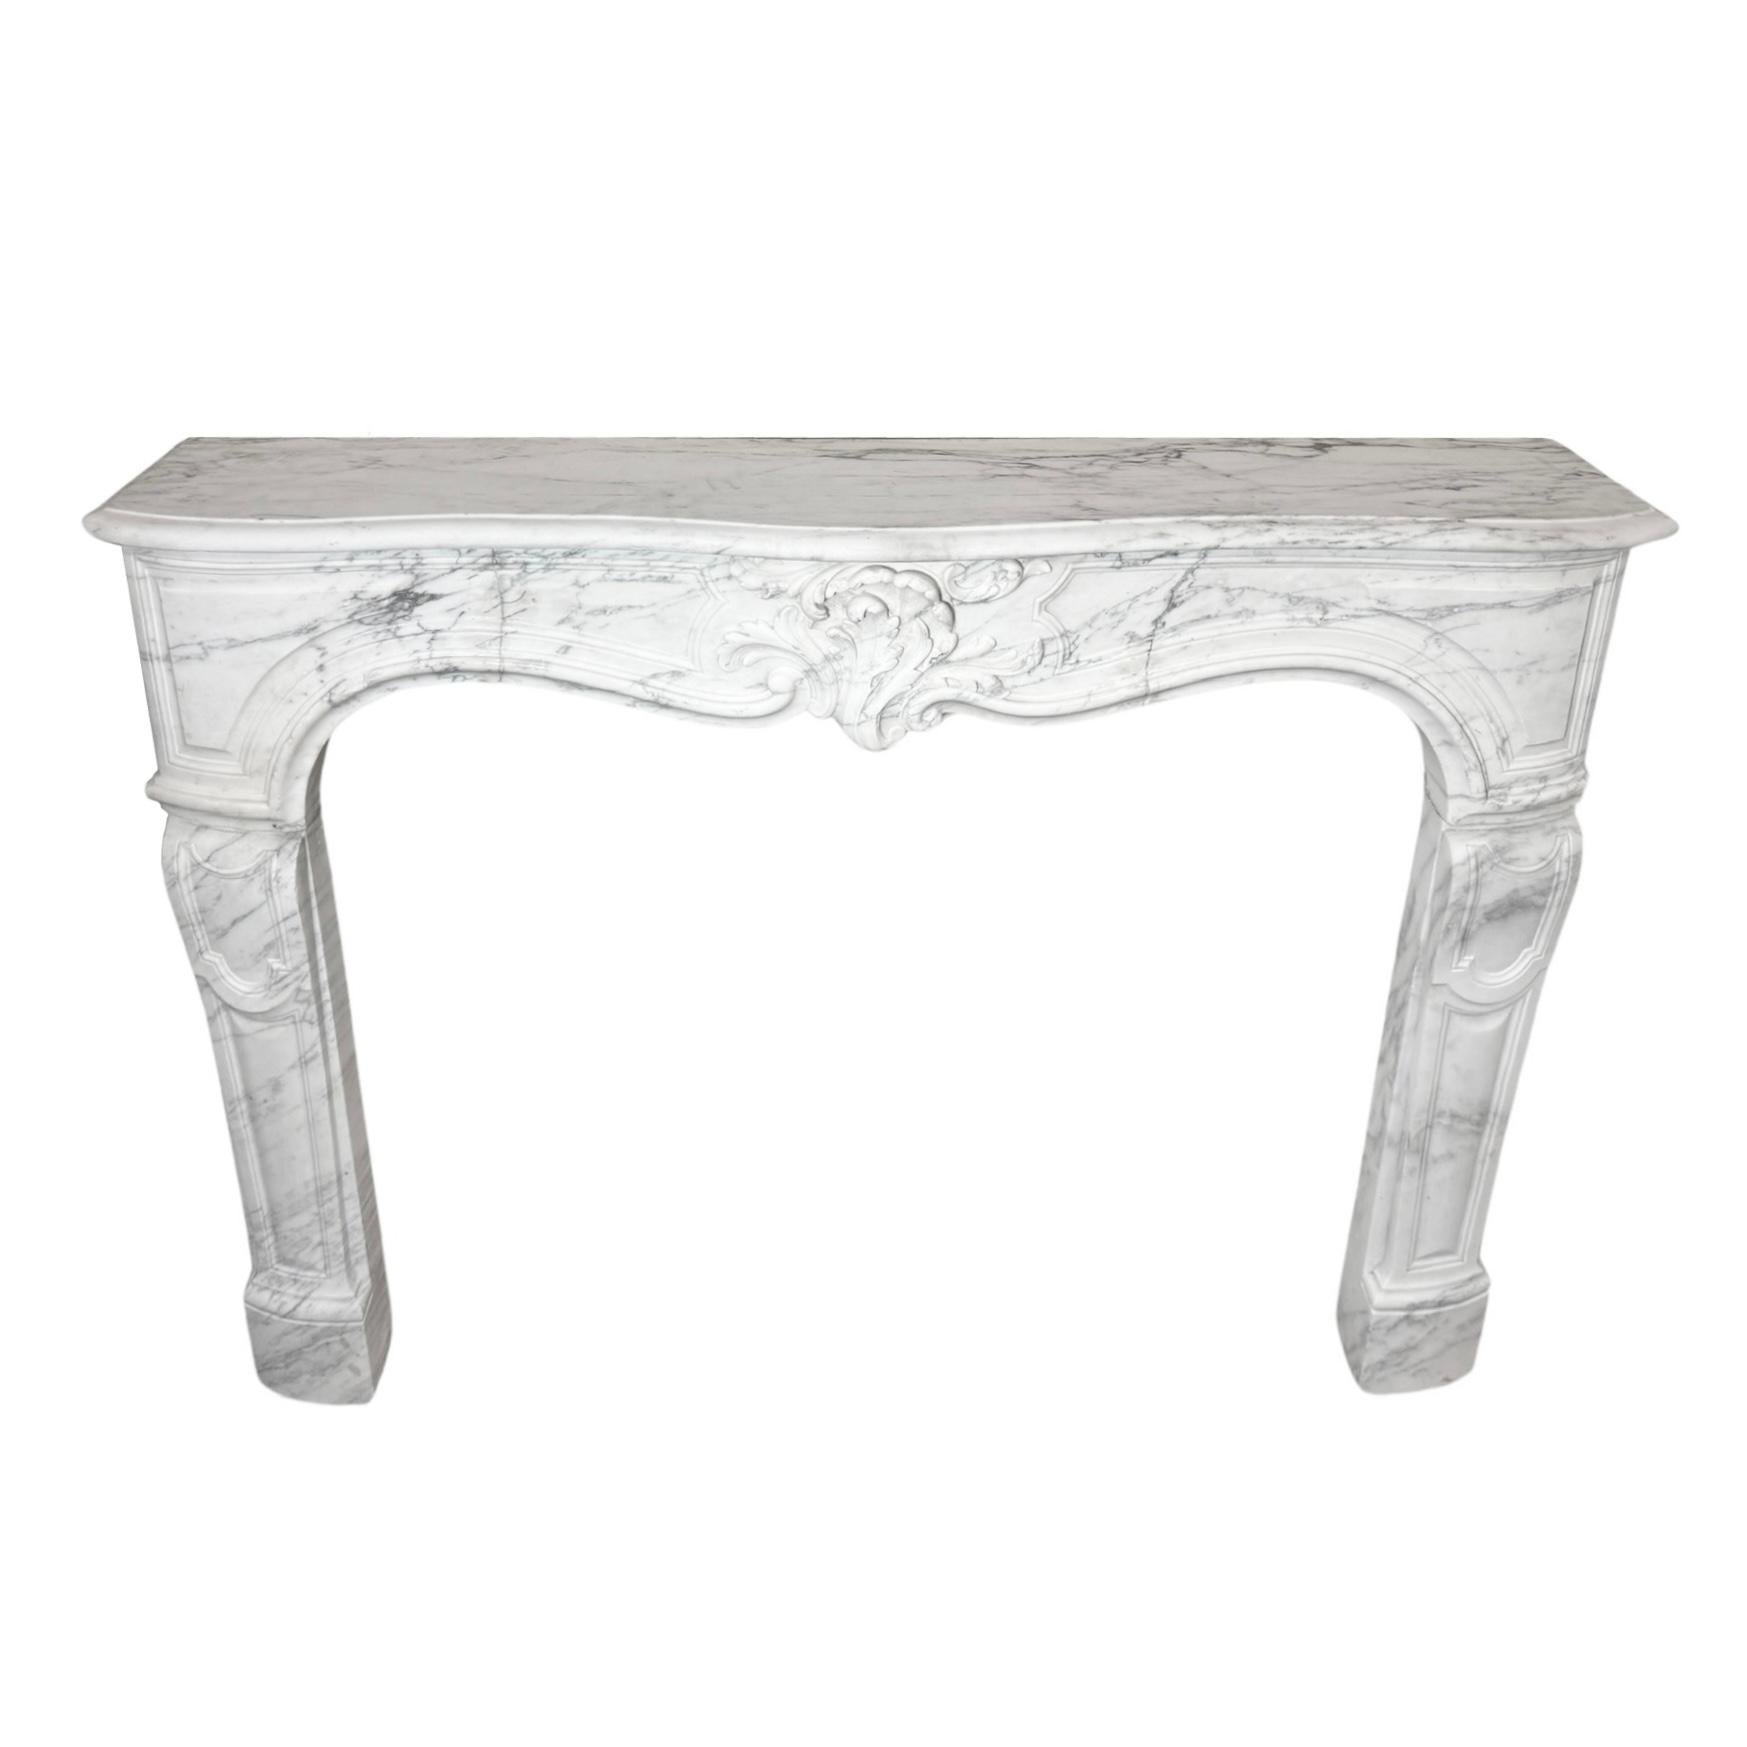 French White Carrara Marble Mantel In Good Condition For Sale In Dallas, TX